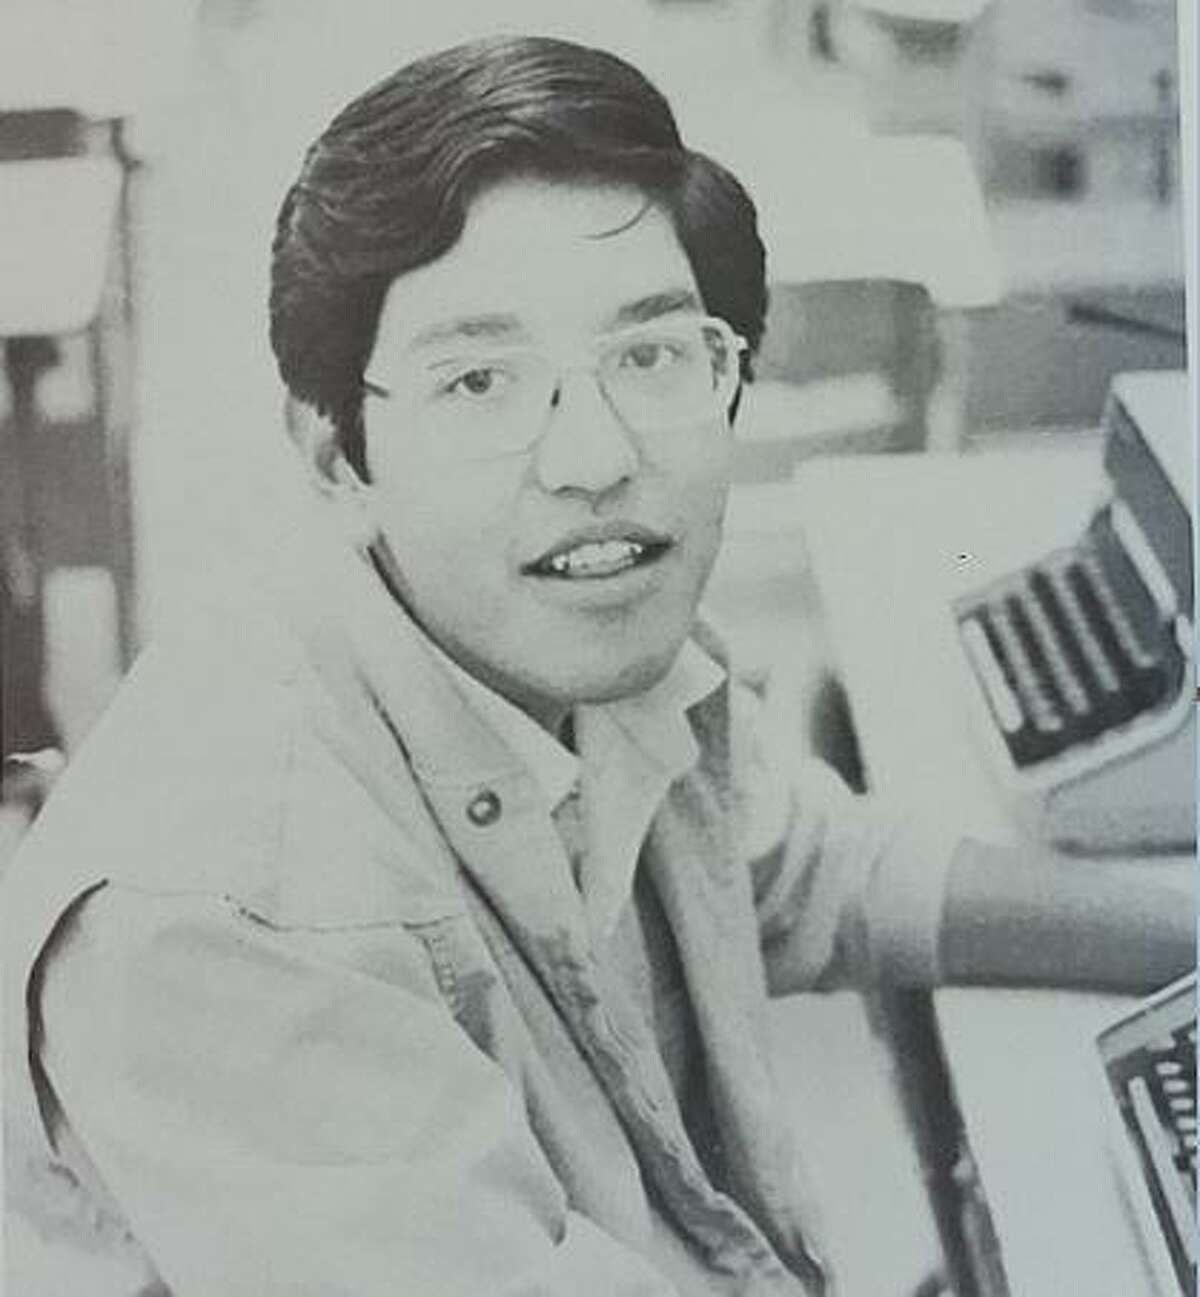 Houston Chronicle food editor Greg Morago attended Boys State in 1977 when he was a student at Casa Grande Union High School in Casa Grande, Ariz. He is shown here in his high school newspaper office.